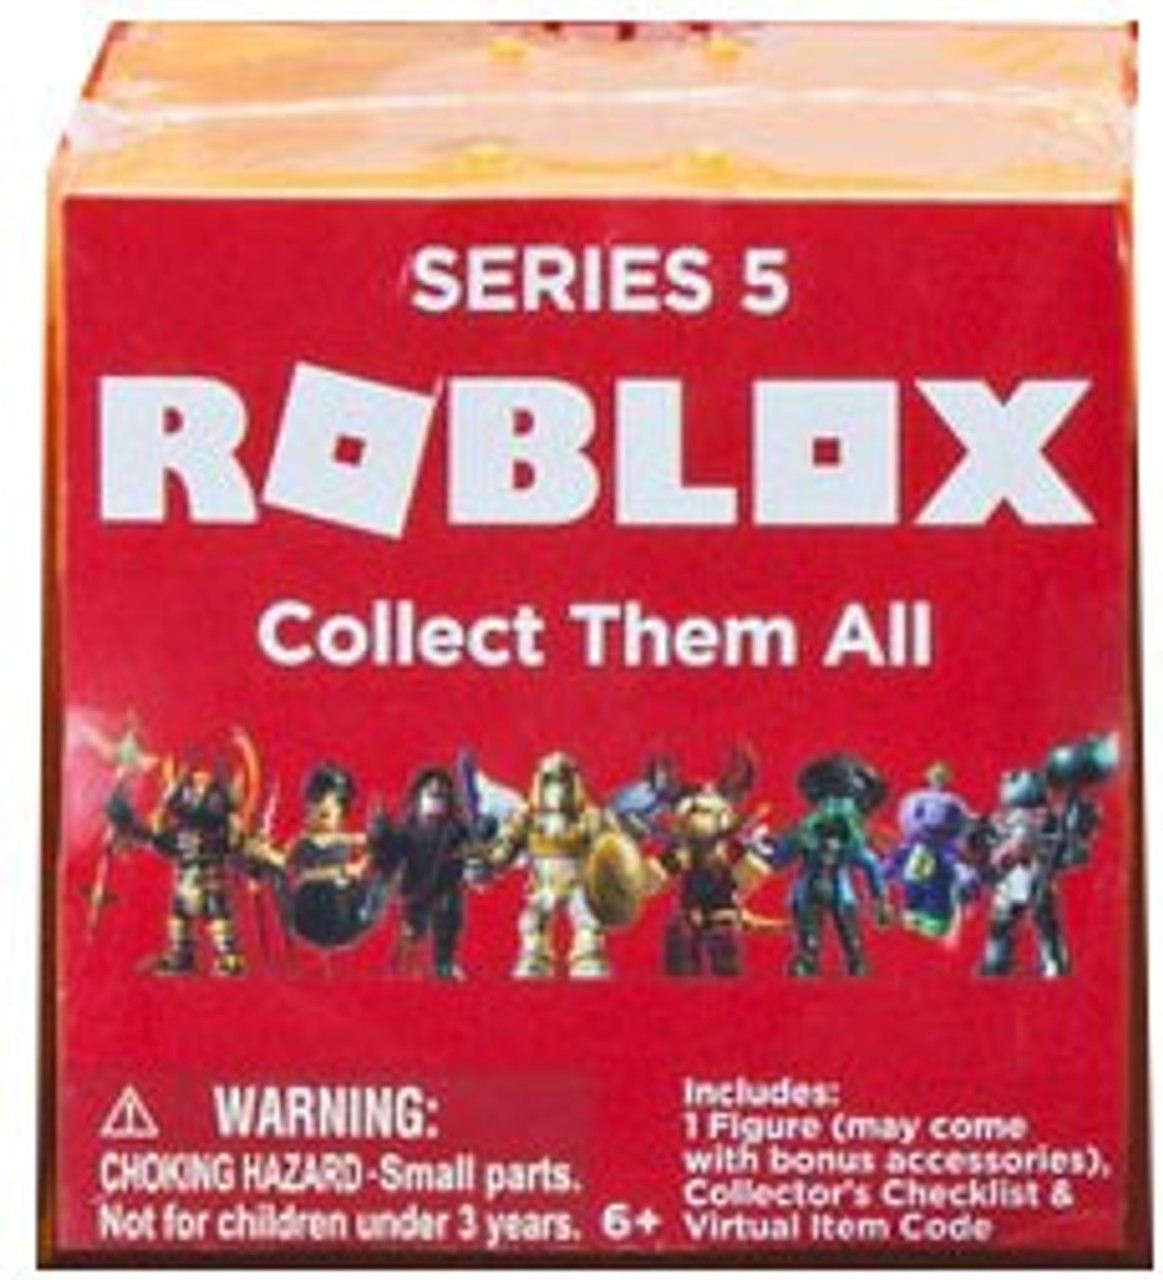 Roblox Series 5 Mystery Pack Gold Cube - roblox series 5 mystery box toys opening entire box showing all figures toy code items